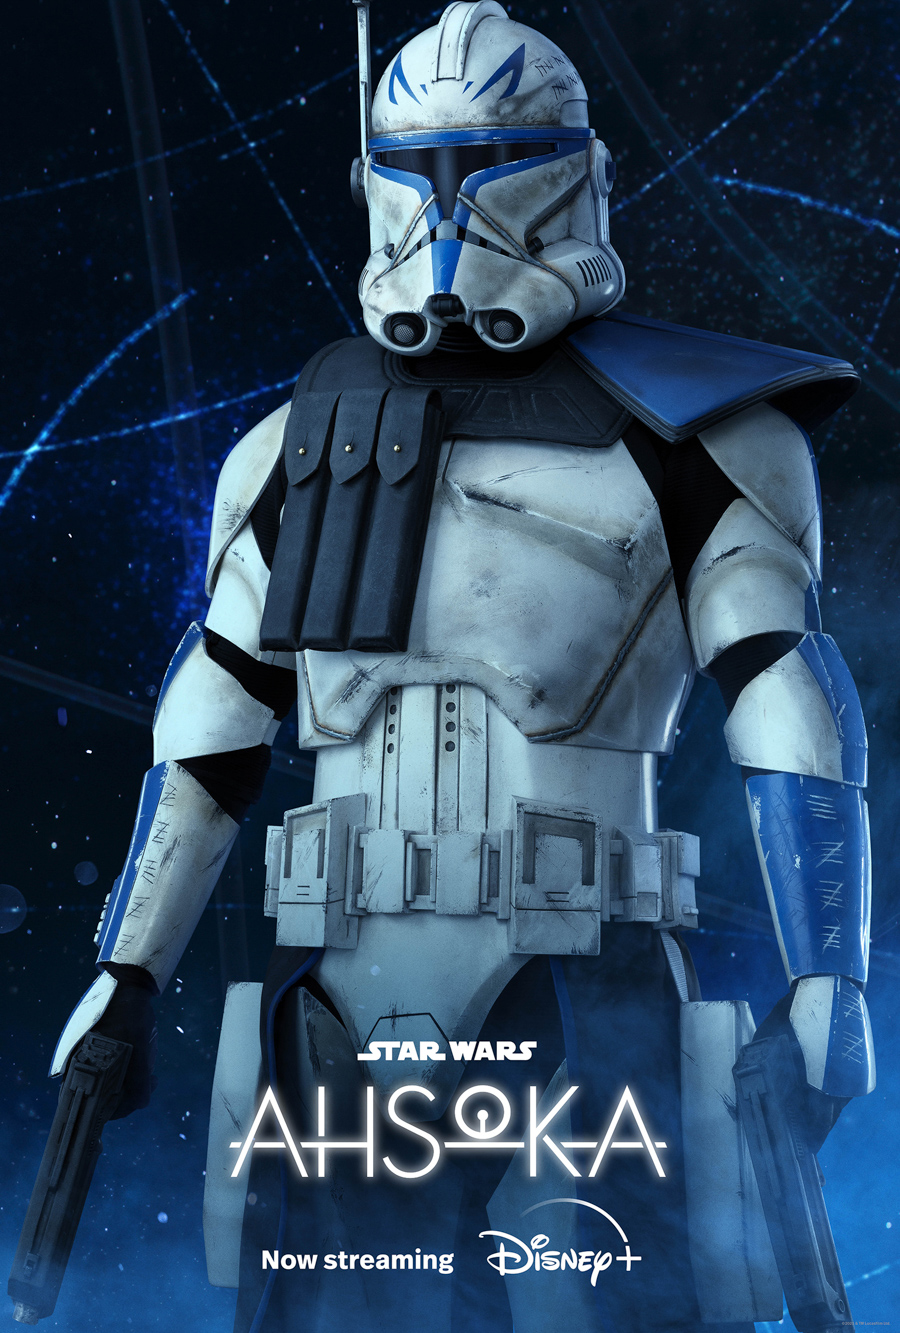 Rex from Ahsoka played by Temuera Morrison is standing in front of a blue galaxy background. Star Wars Ahsoka is written in white on the bottom with now streaming written beneath that with the Disney plus logo written beside now streaming.